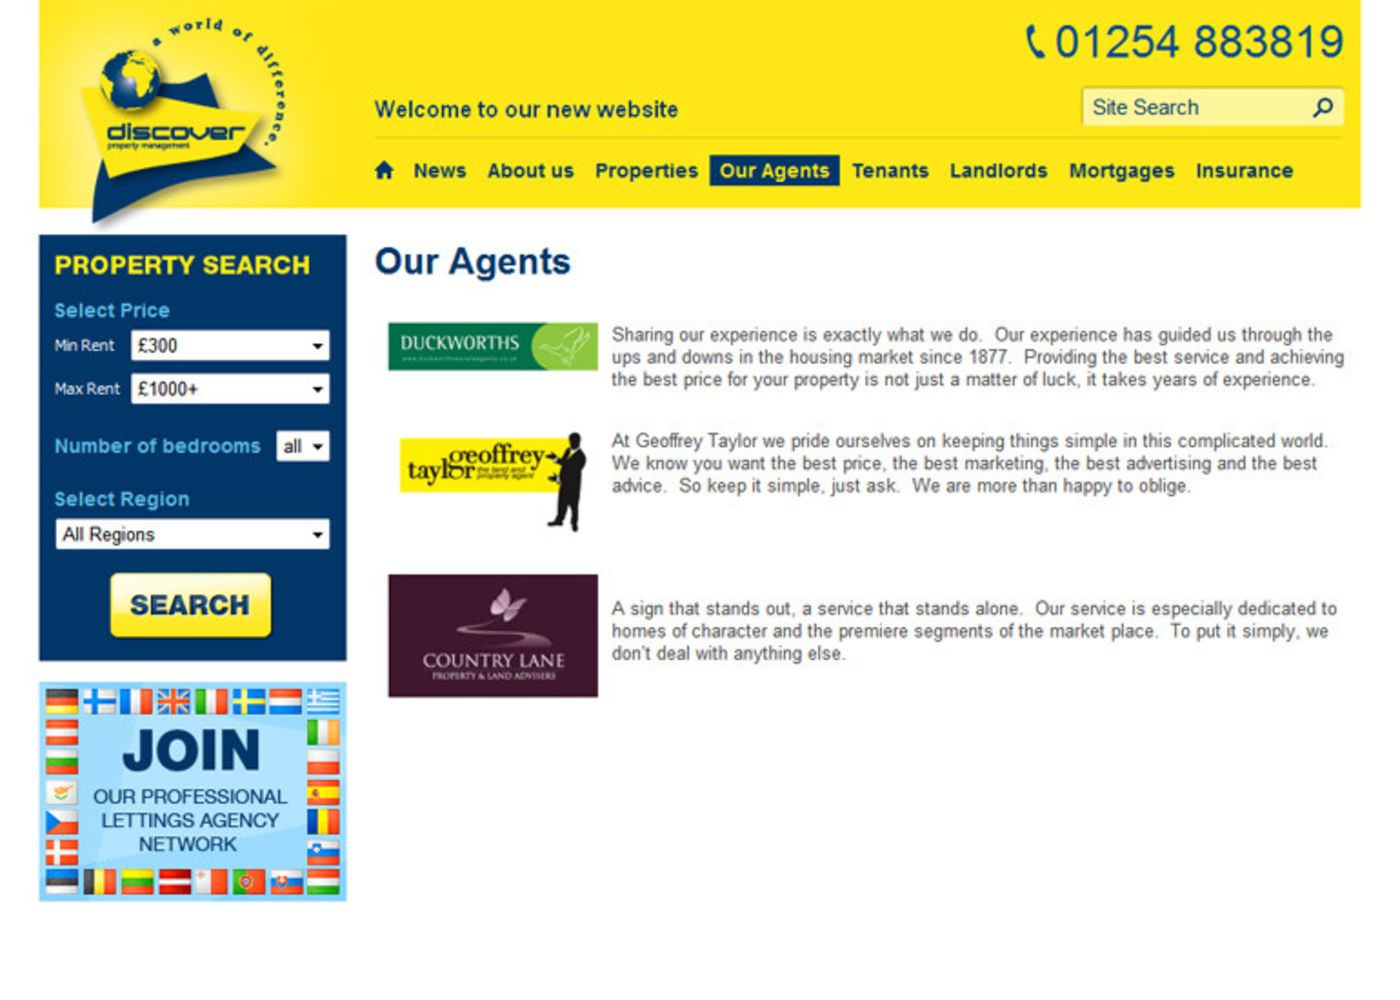 Discover Property Management Our Agents